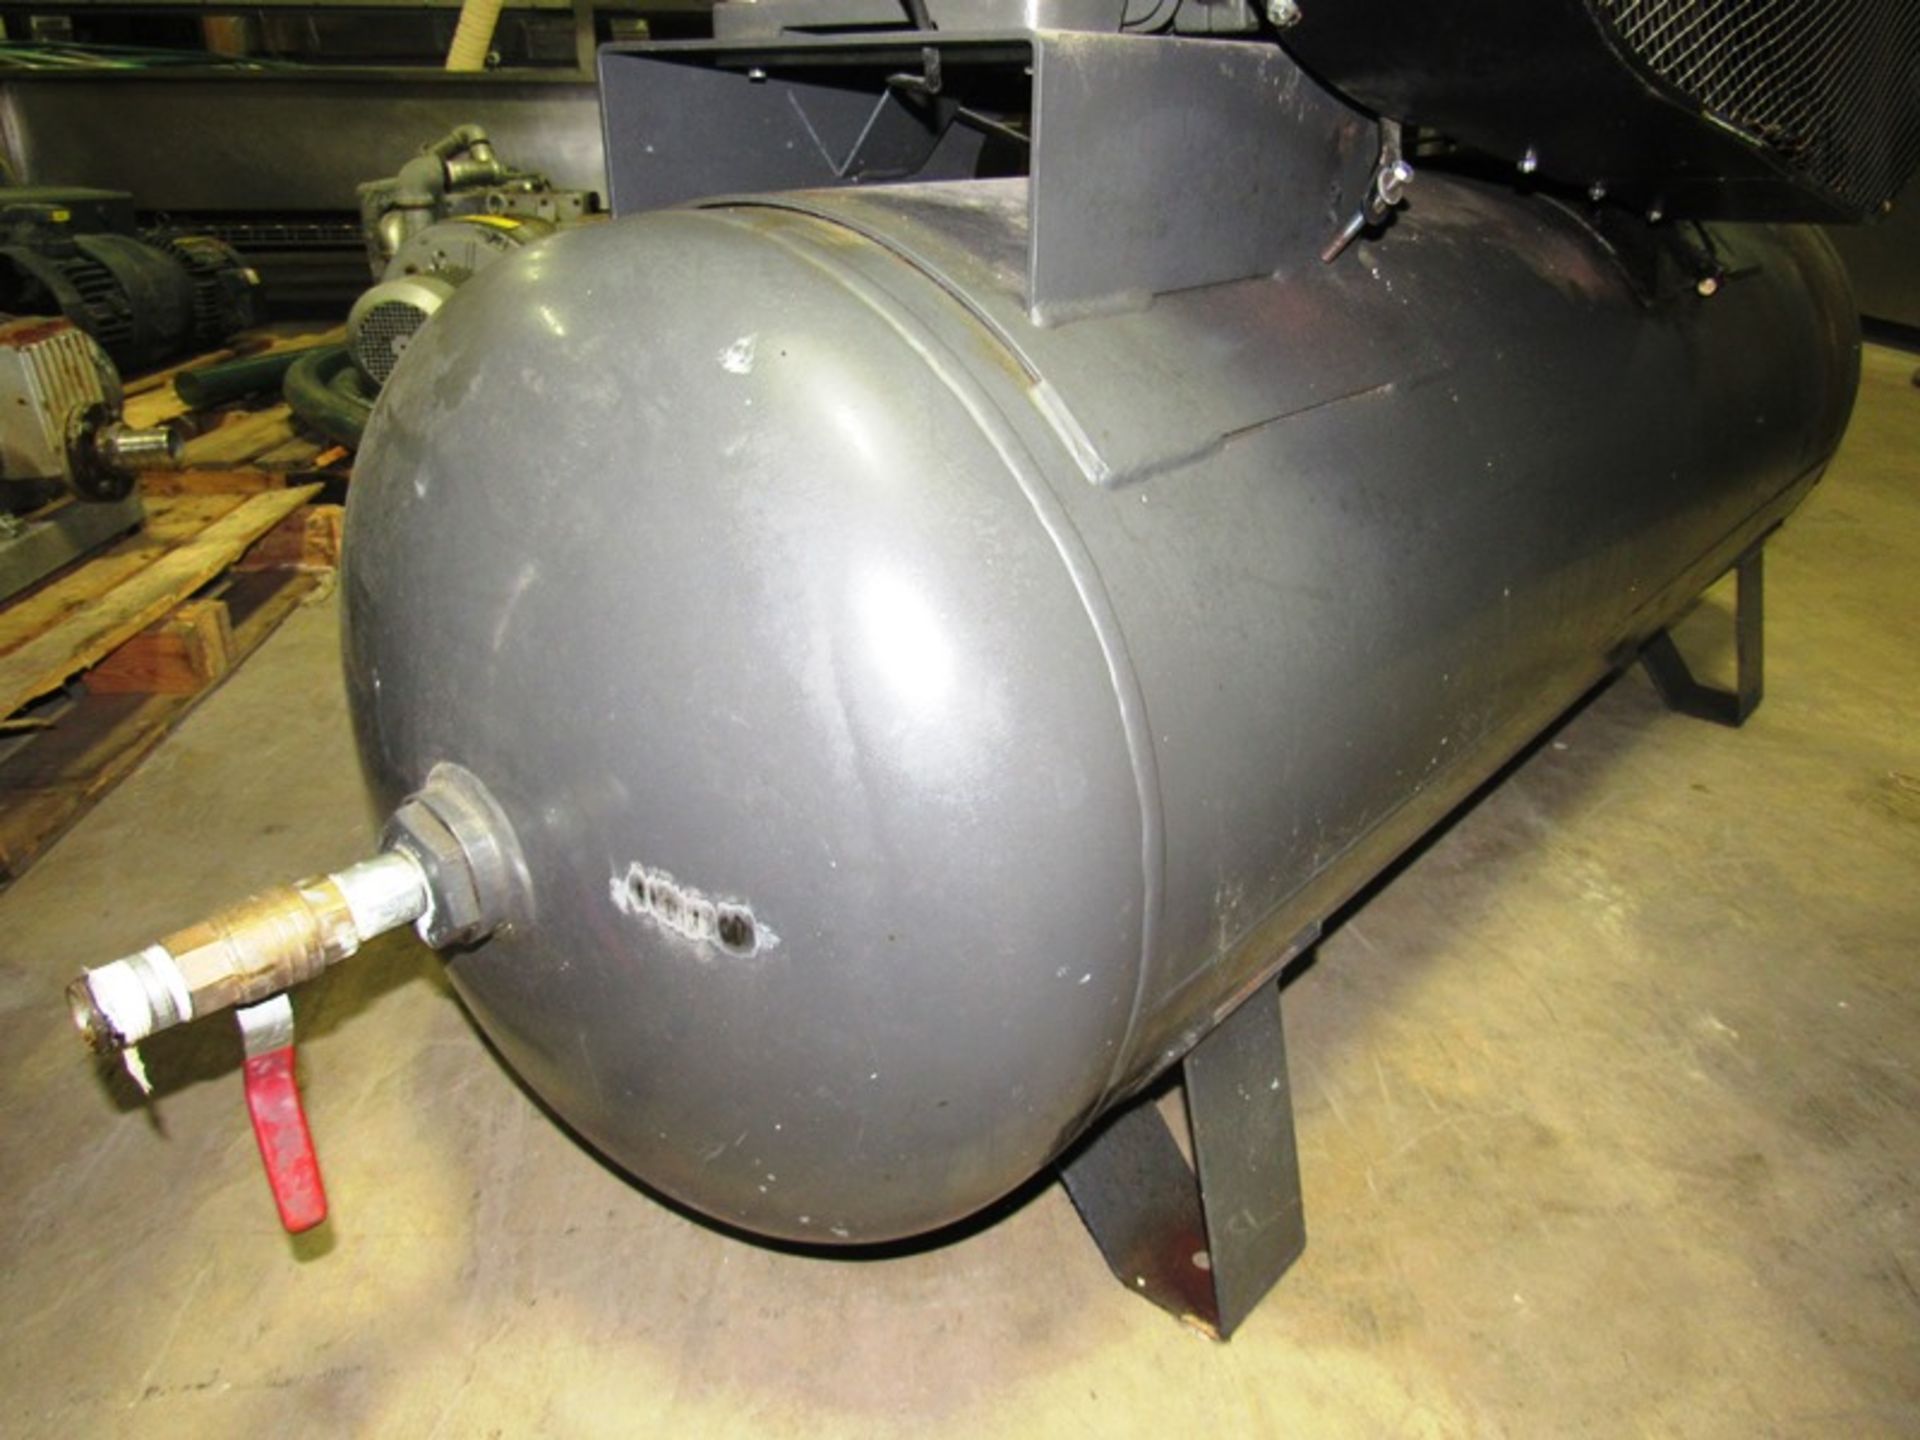 Schulz Mdl. 80BR 2 Stage Air Compressor, 15 h.p., 208/230/460 volts, 3 phase, on holding tank - Image 5 of 7